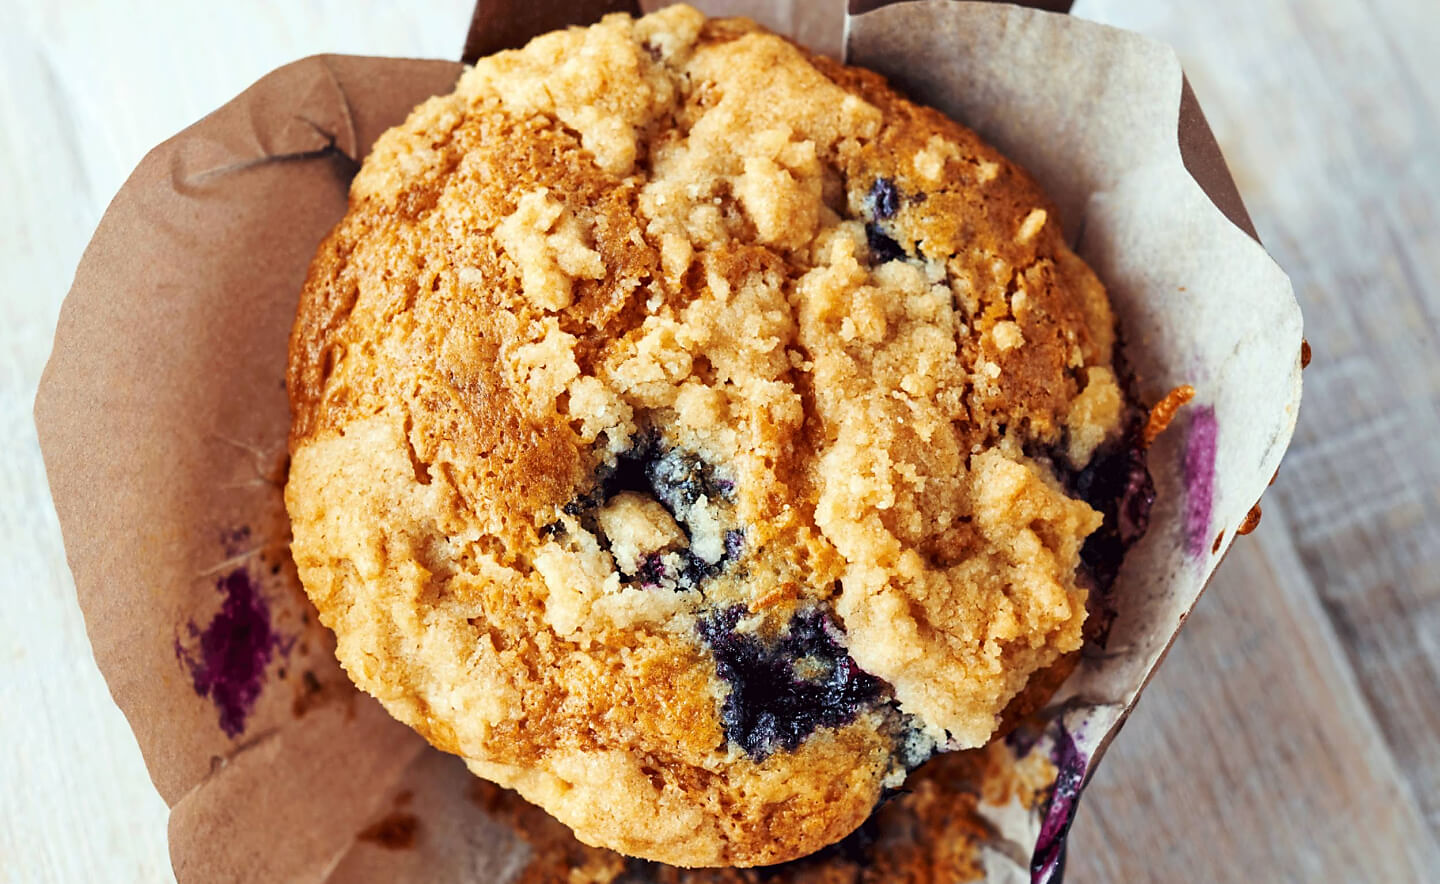 Birds-eye view of a streusel-topped blueberry muffin inside of a decorative liner